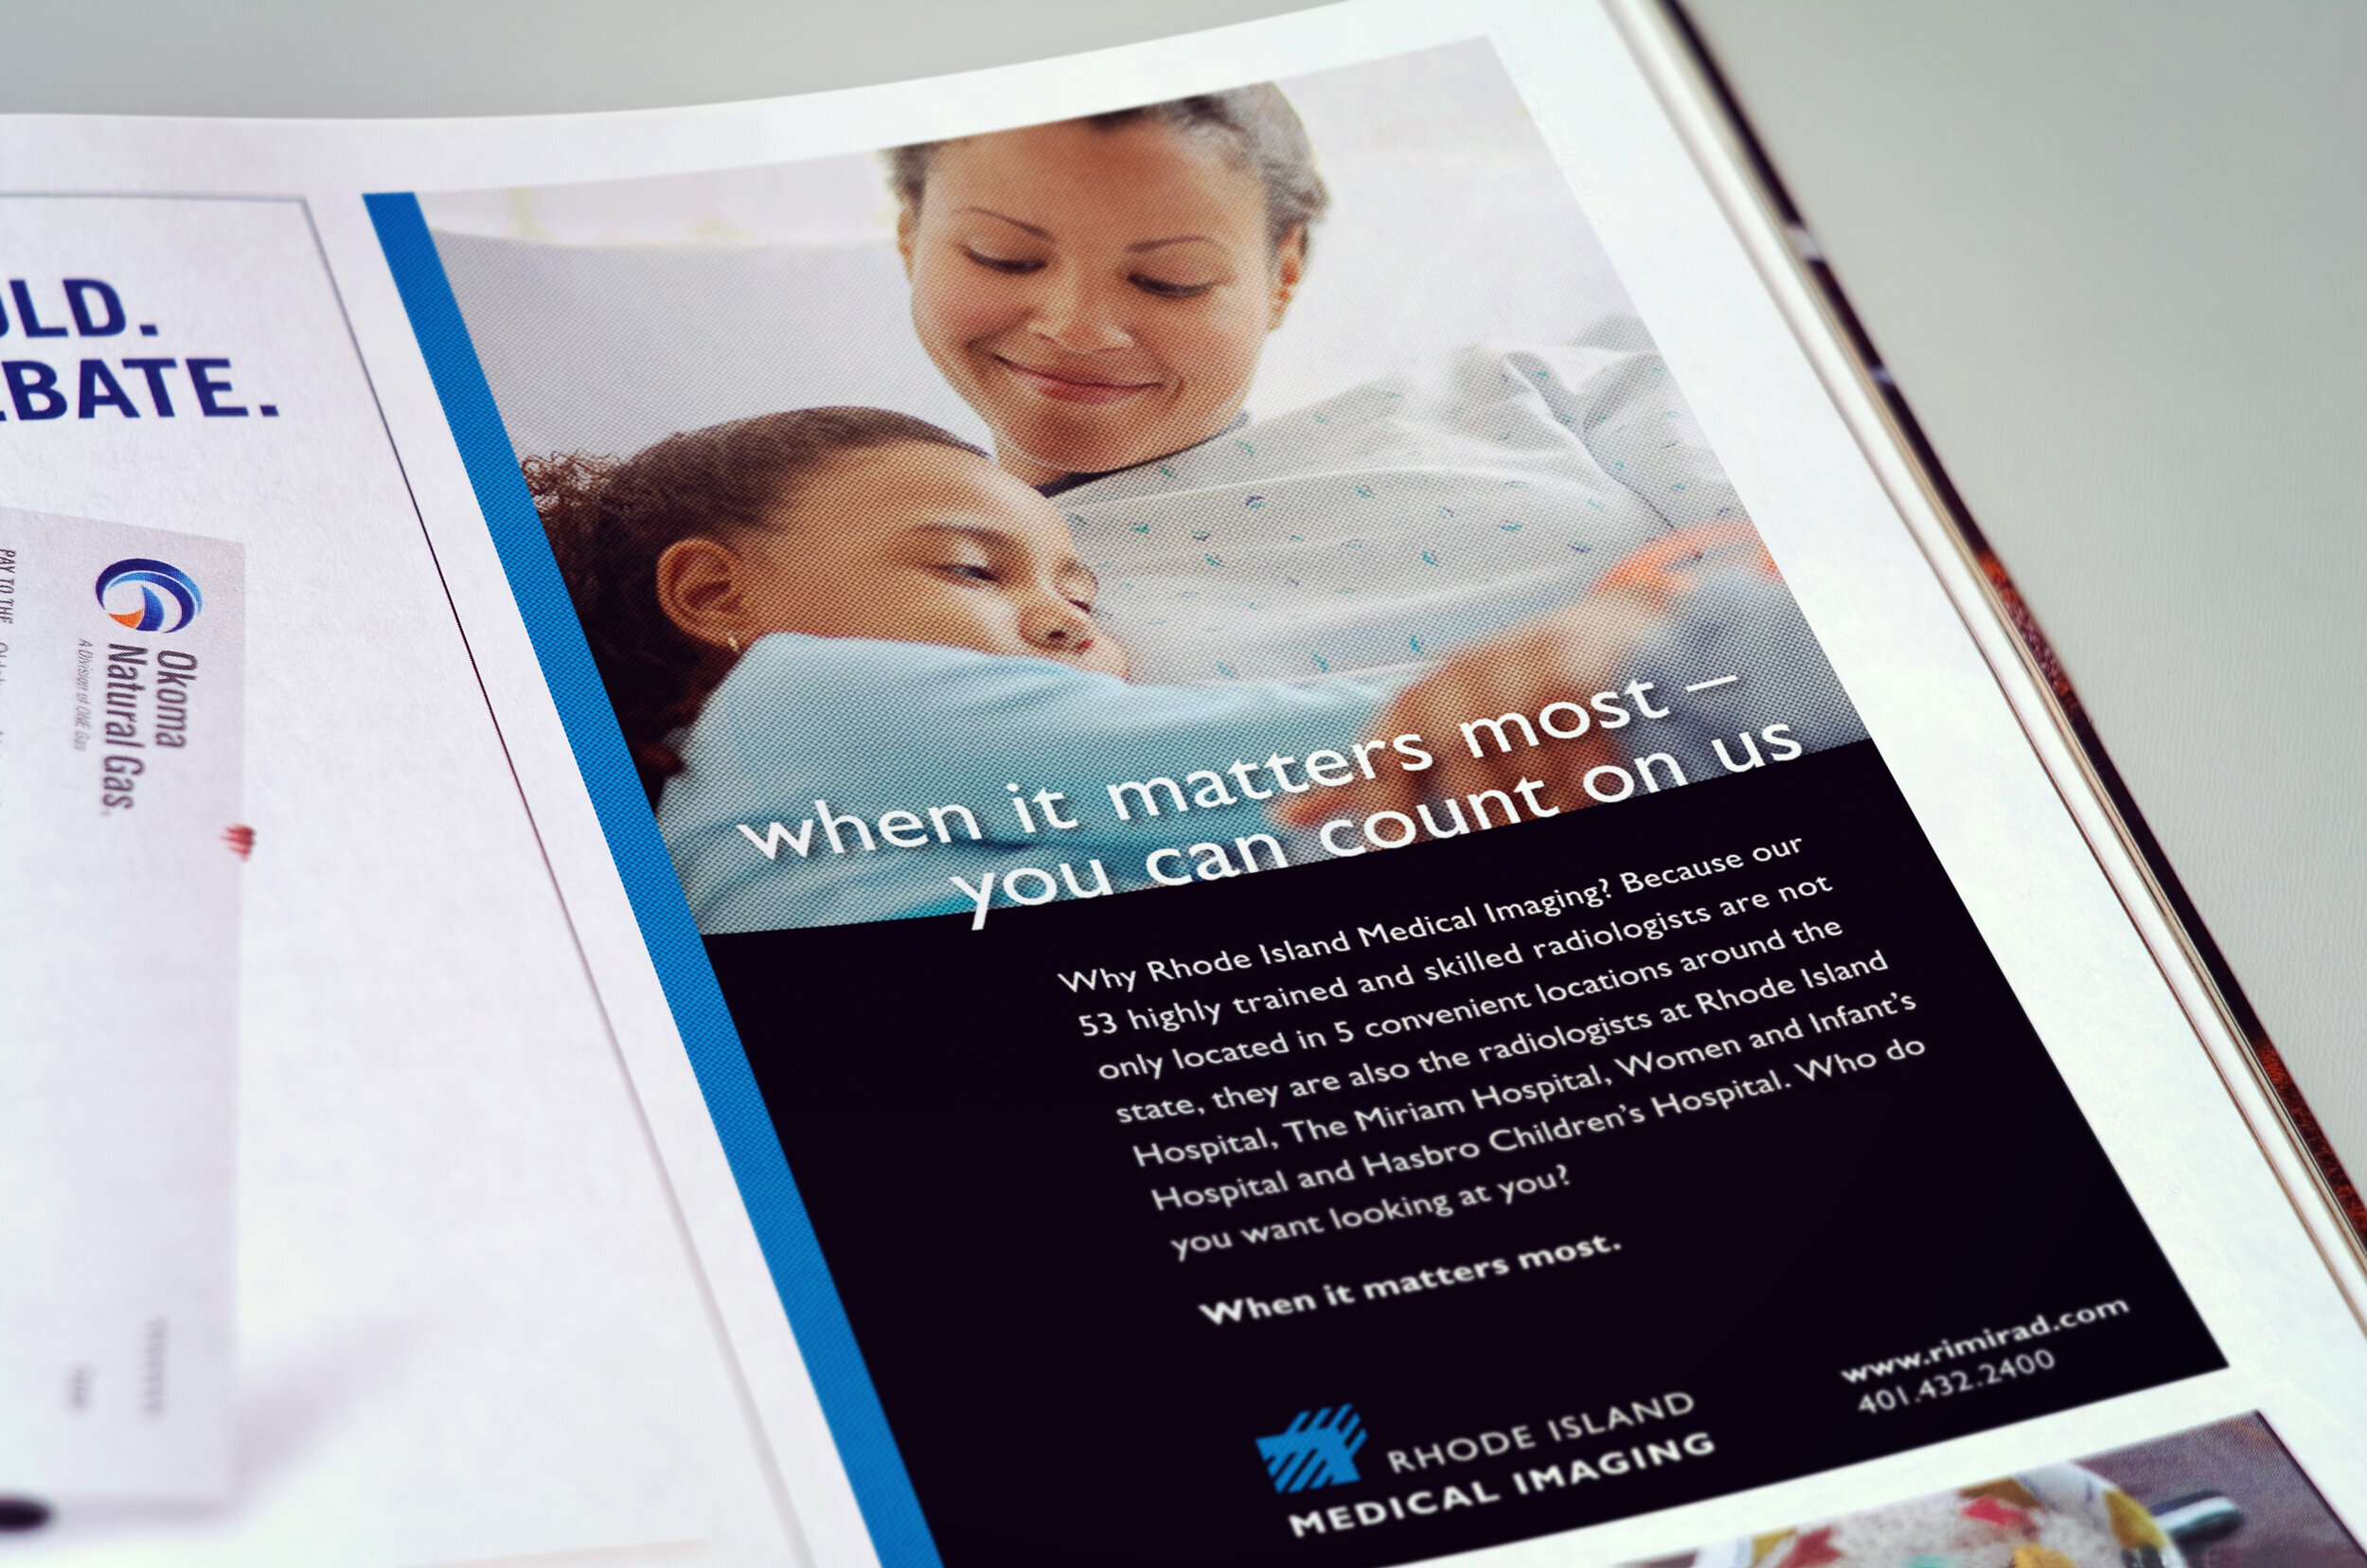   Rhode Island Medical Imaging Campaign  • designer: Michael Balint • copy and art direction: Acadia Consulting Group 